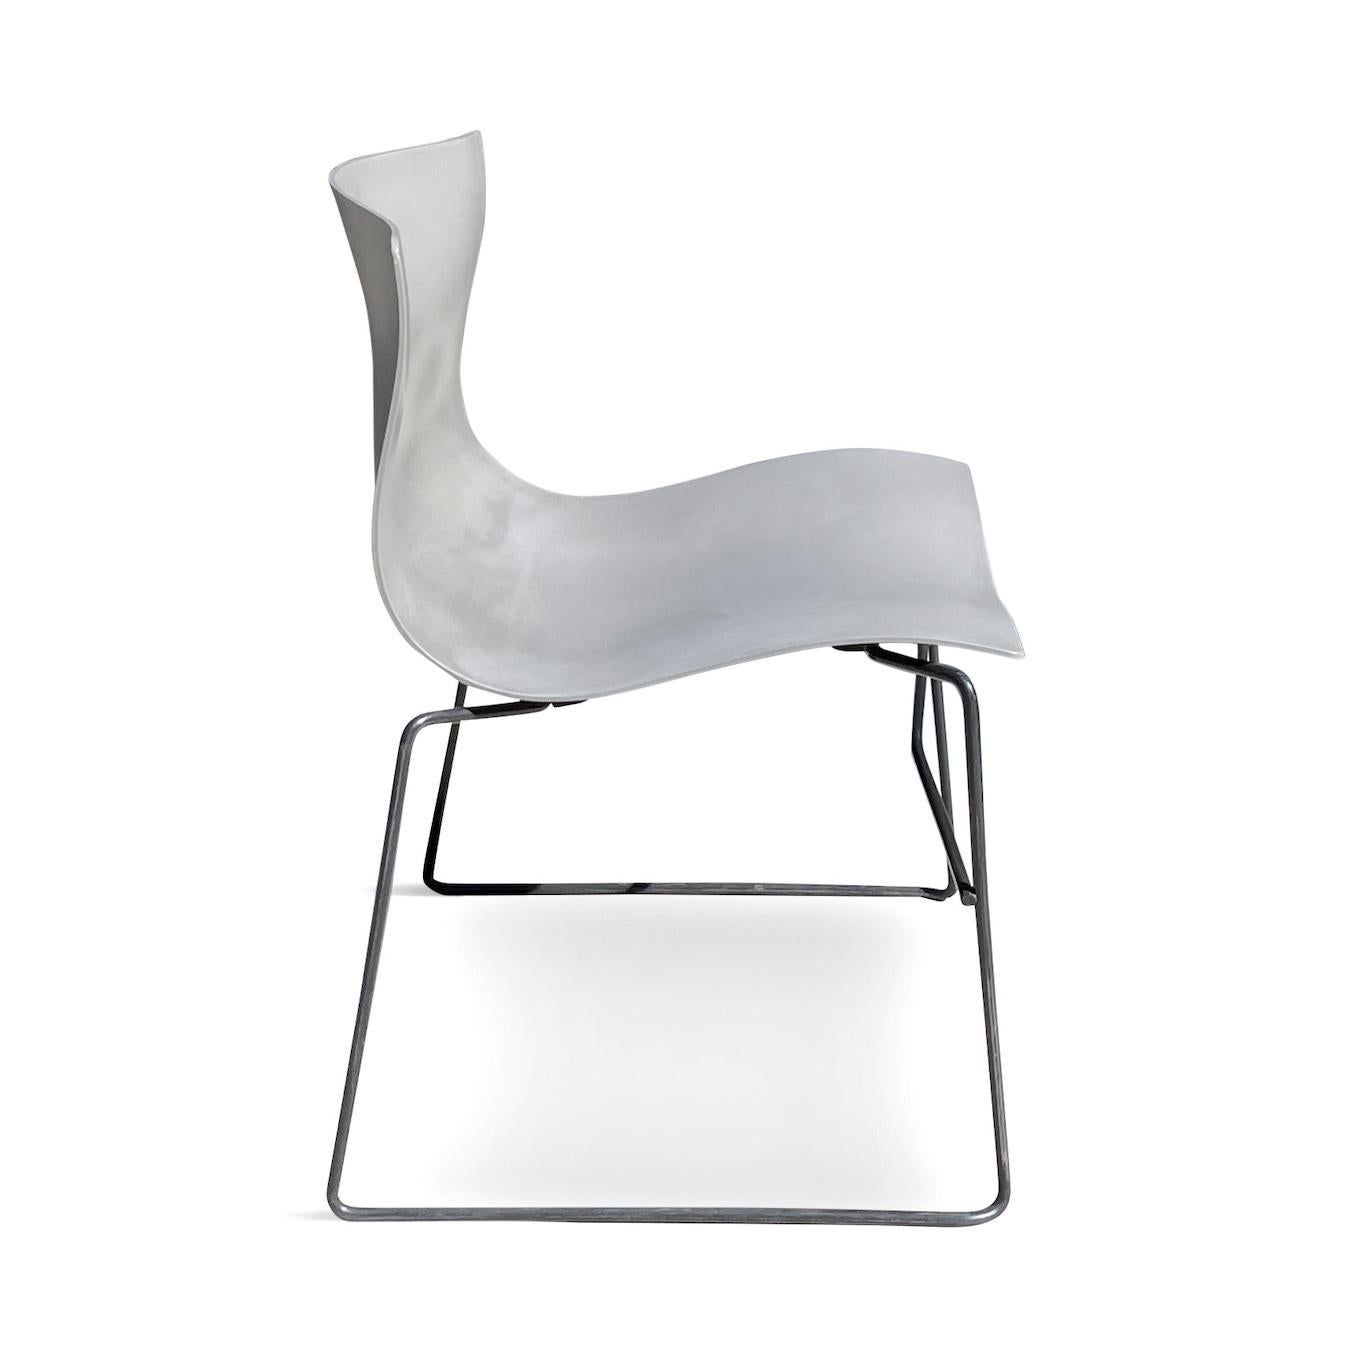 Set of 5 Grey Handkerchief Chairs by Lella and Massimo Vignelli for Knoll 1